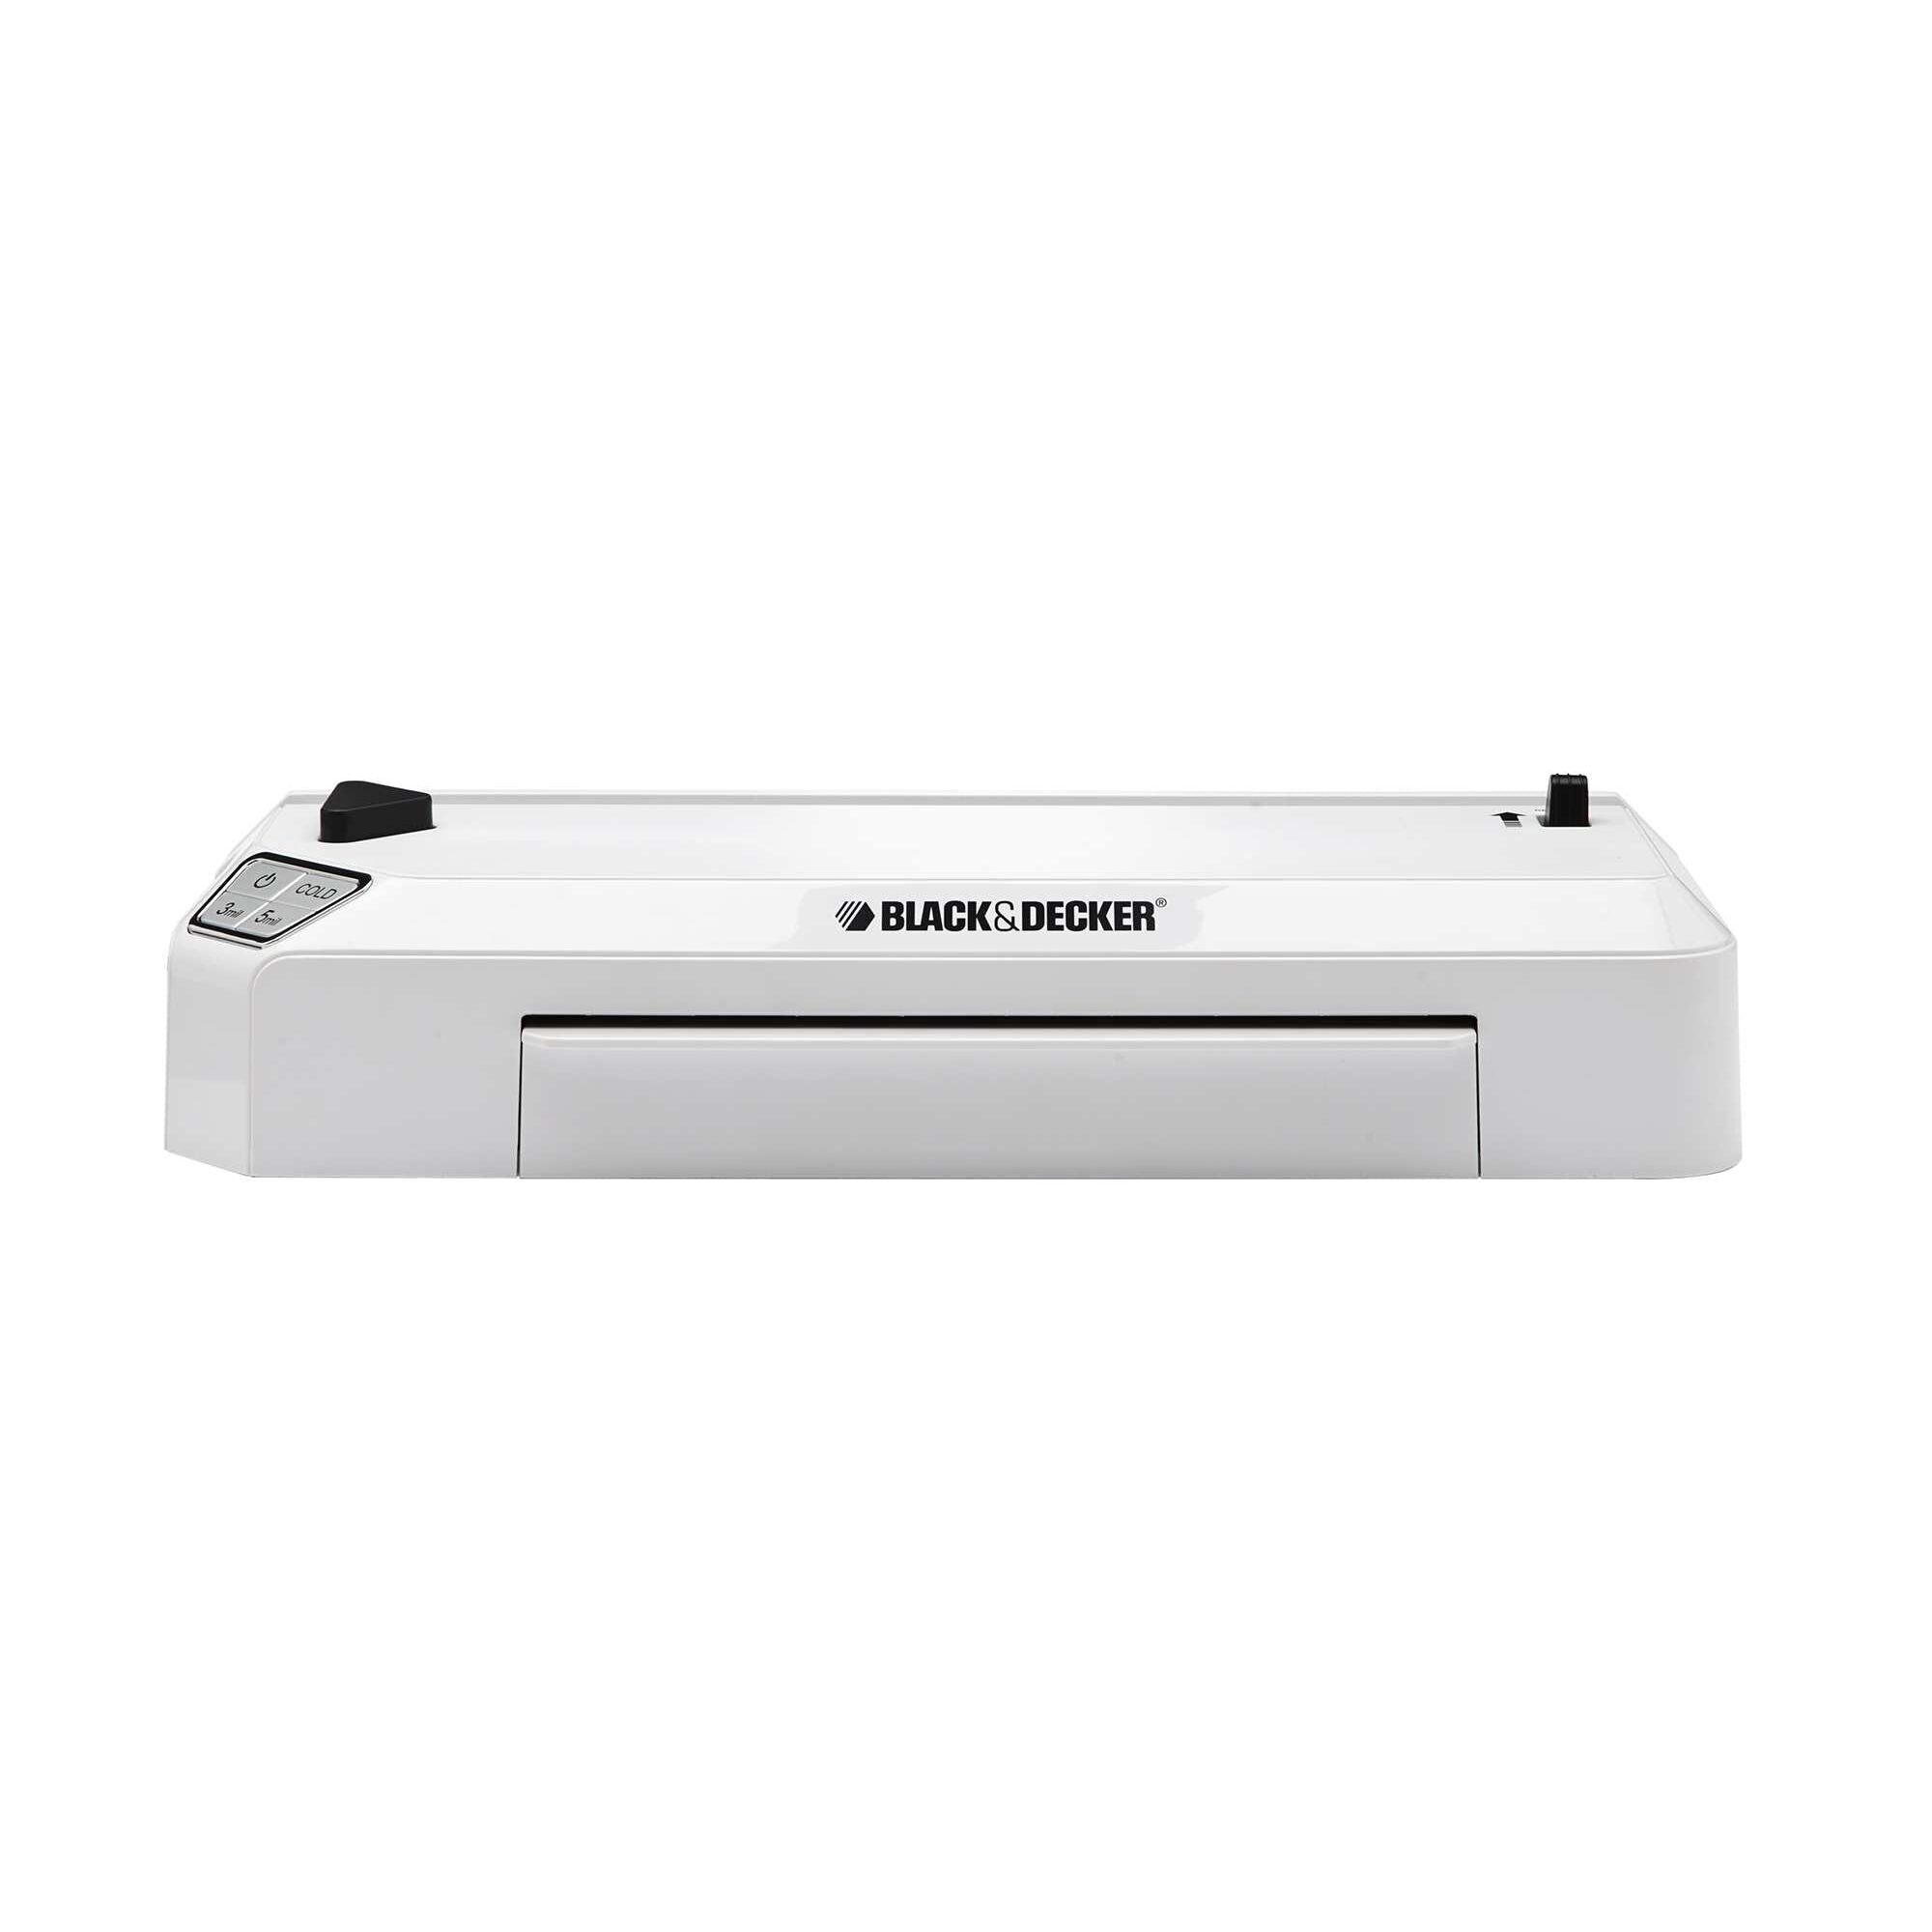 Profile of Flash 9 and 5 tenths inch Thermal Laminator.